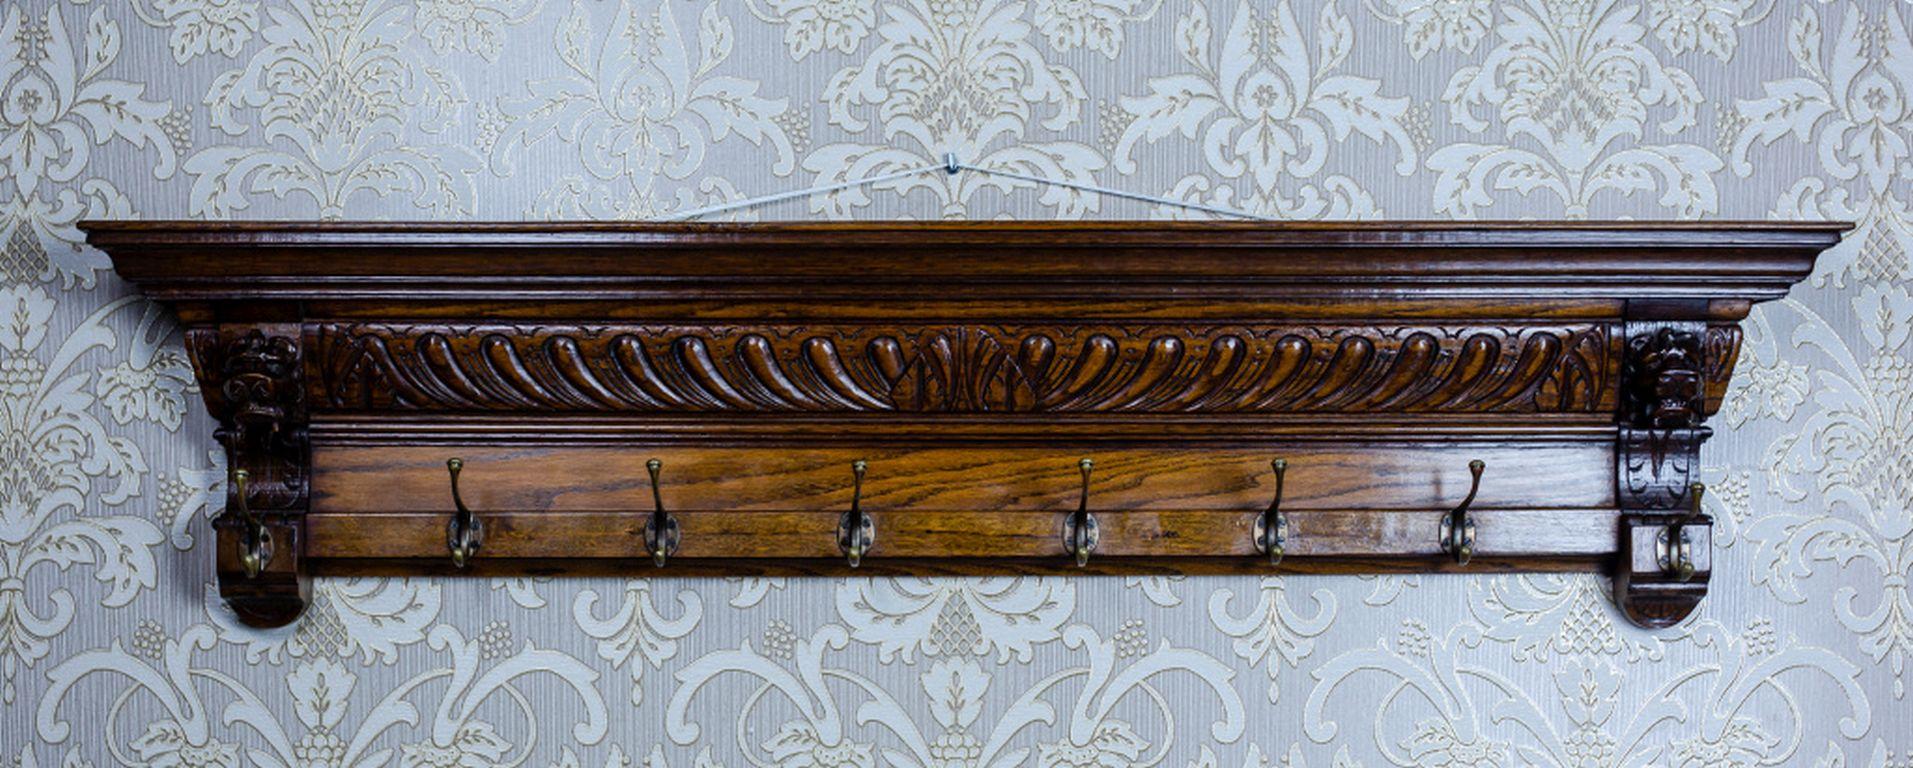 We present you a big Neo-Renaissance oak coat rack.
The whole is from Q4 of the 19th century.
The coat rack has six brass hooks and is topped with a profiled cornice.

This item is in very good condition.